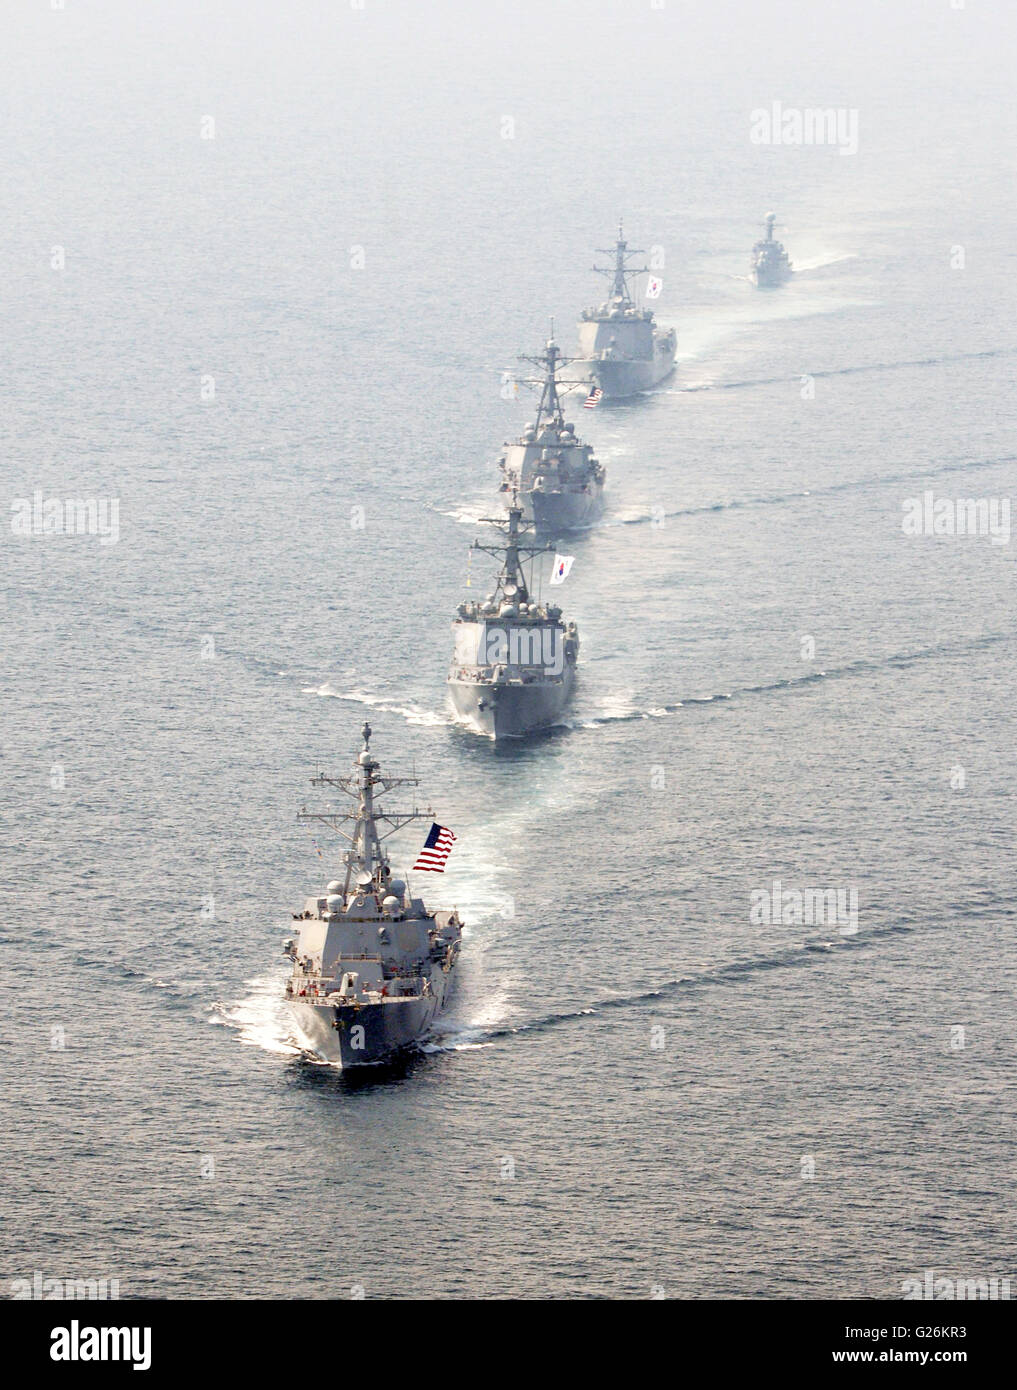 The U.S. Navy and South Korean navy ships in formation during a joint exercise May 21, 2016 in the Yellow Sea. Ships from front to back are: U.S Navy guided-missile destroyer USS Momsen, South Korean Navy destroyer ROKS Seoae Ryu Seong-ryong, USS Decatur, ROKS Yulgok Yi and patrol craft ROKS Kwang Myung . Stock Photo